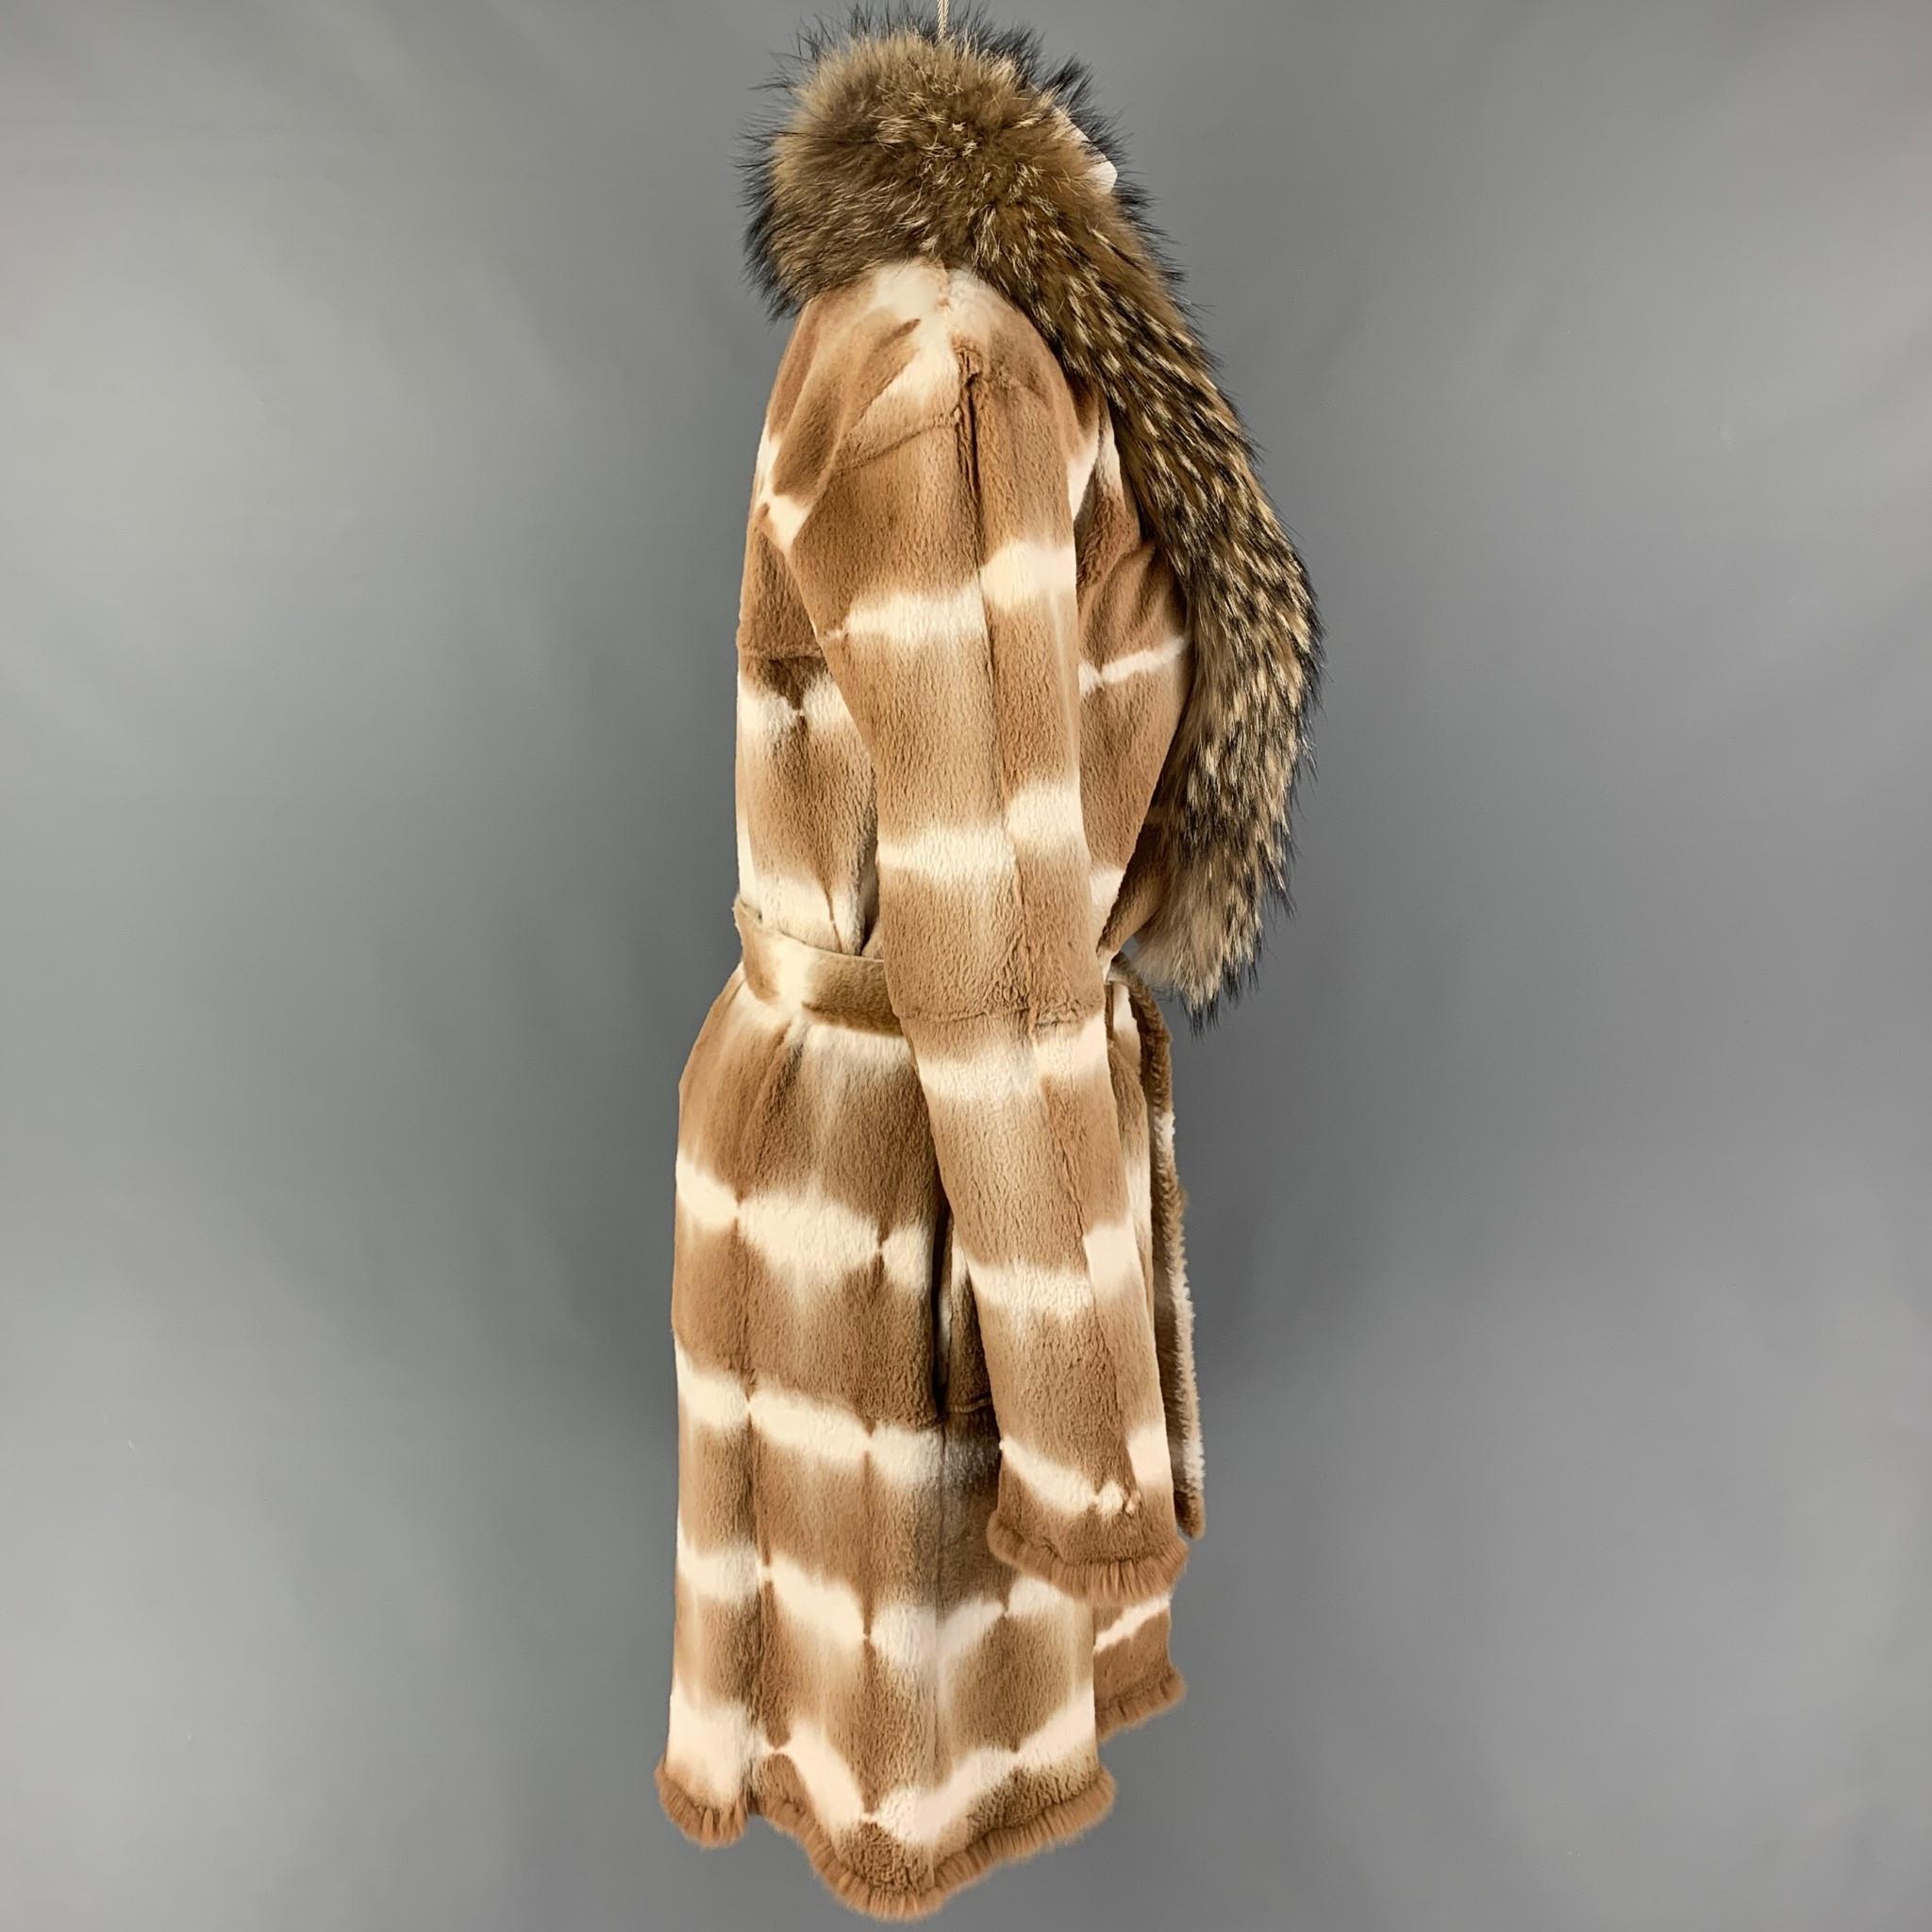 Vintage NIGEL PRESTON coat comes in a tan & cream fur featuring a coyote fur trim, belted, slit pockets, and a single button closure. 

Good Pre-Owned Condition. Light wear. As-Is.
Marked: M
Original Retail Price: $4,500.00

Measurements:

Shoulder: